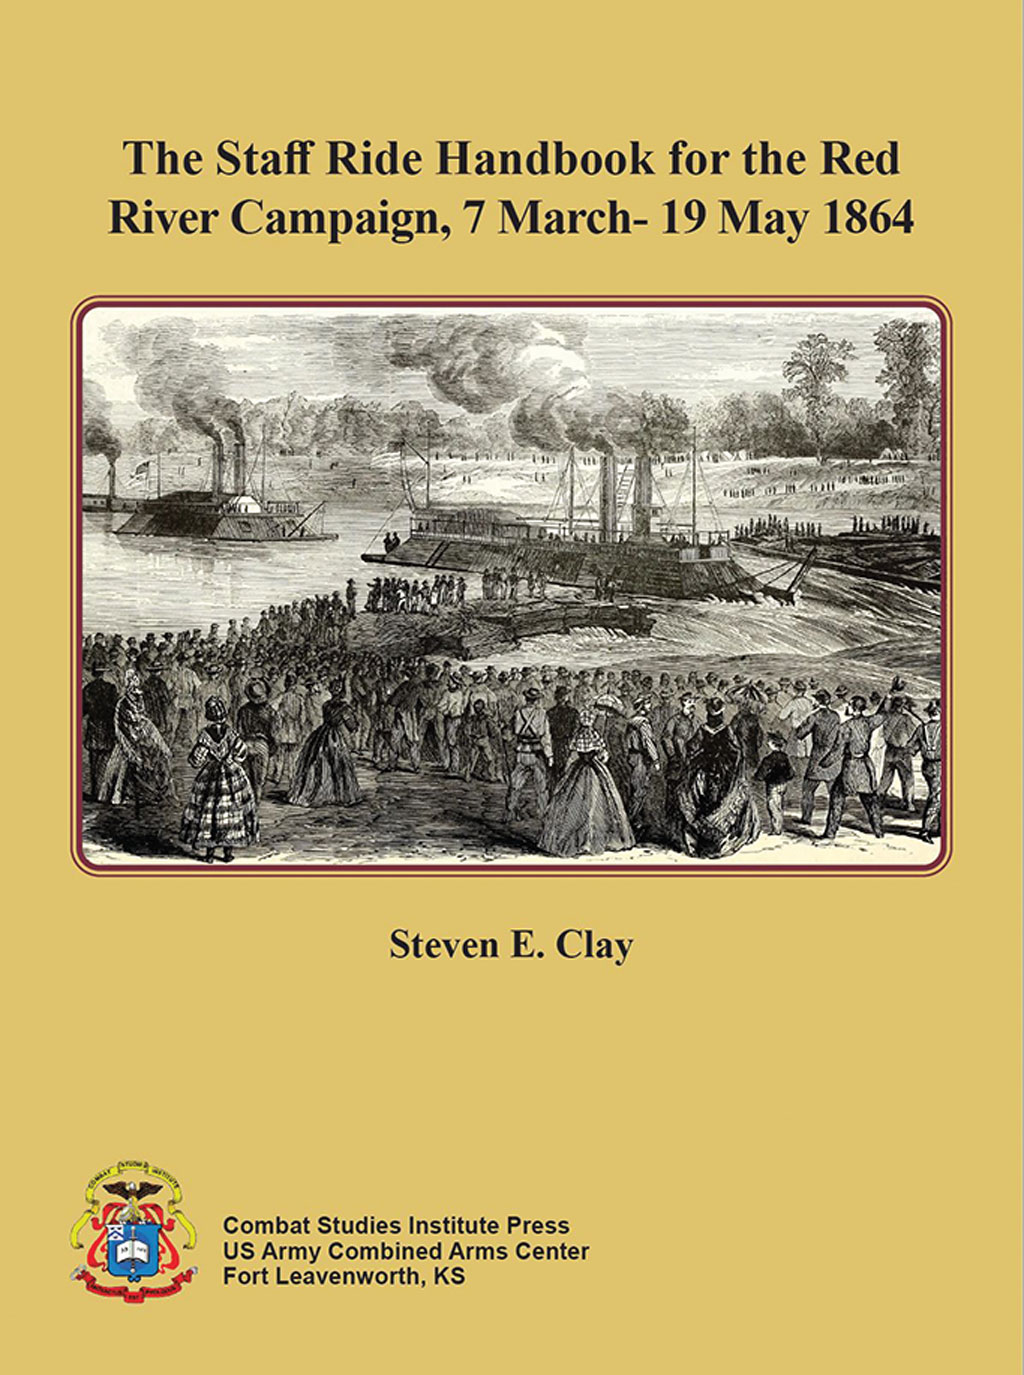 The image is a book cover titled The Staff Ride Handbook for the Red River Campaign, 7 March- 19 May 1864 by Steven E. Clay, published by Combat Studies Institute Press, US Army Combined Arms Center, Fort Leavenworth, KS. The cover features a historical engraving of a river scene with steamboats and a crowd of people.